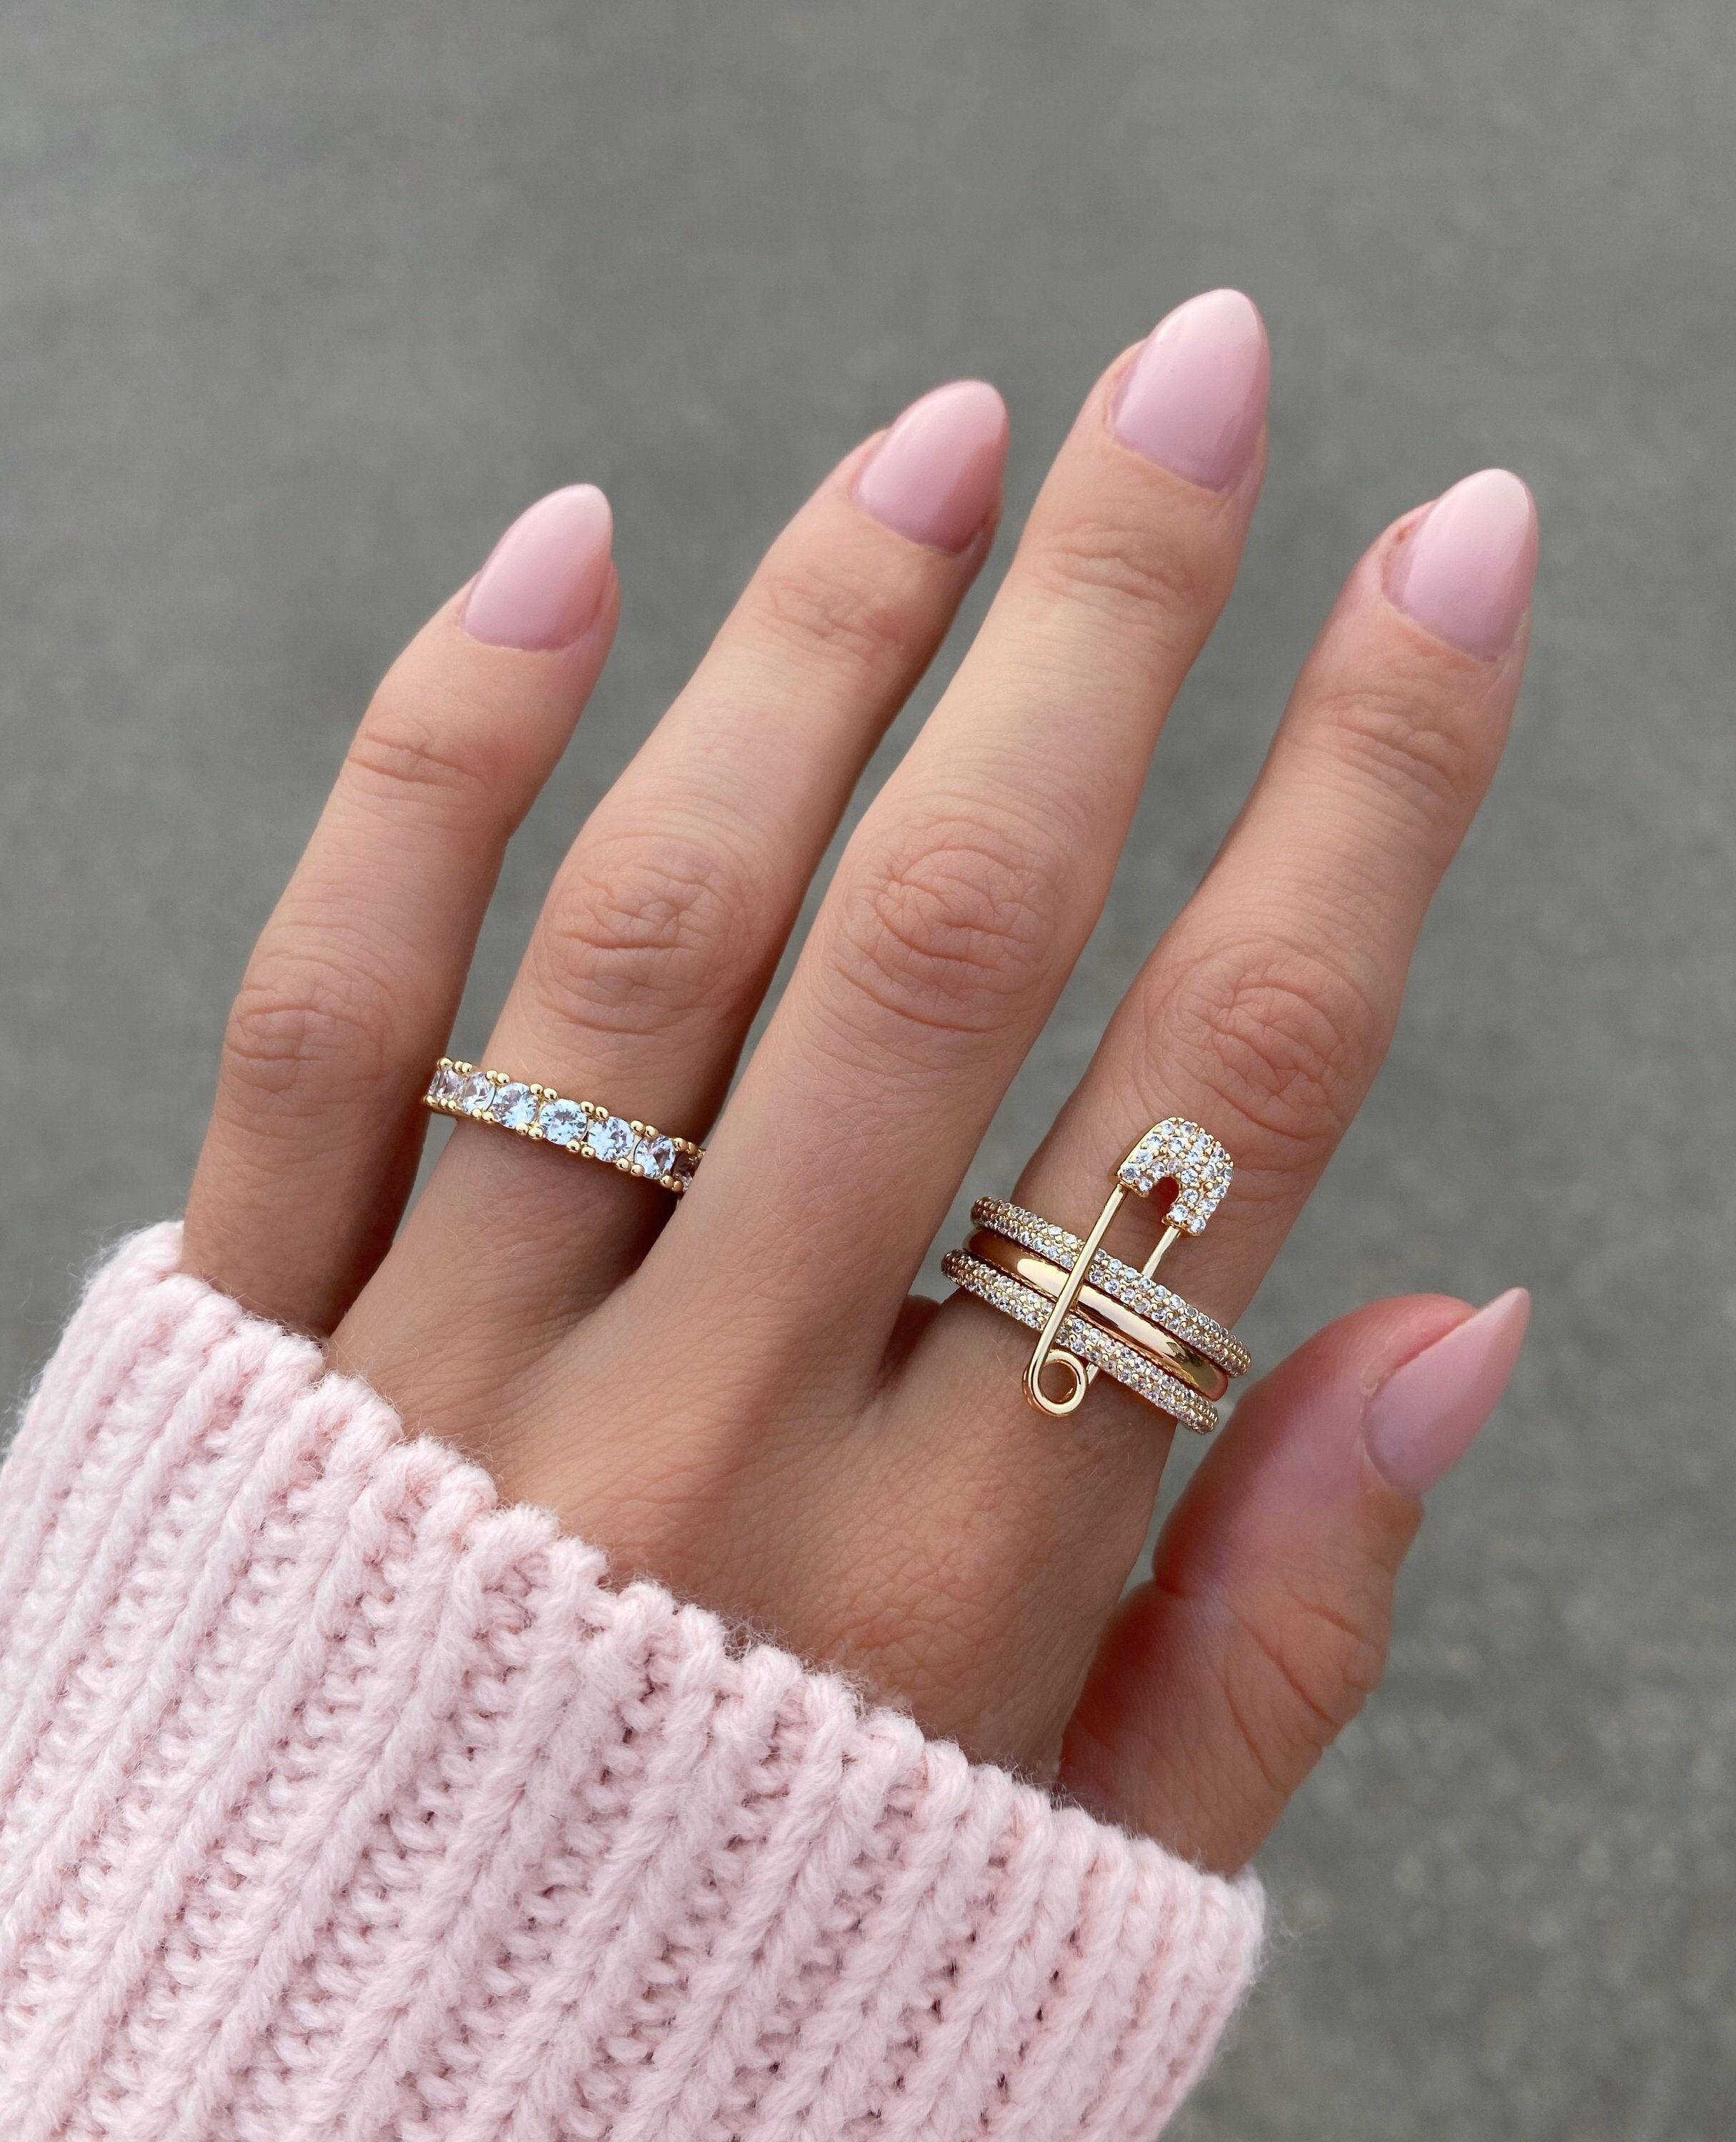 Pin on Women's Accessories Rings